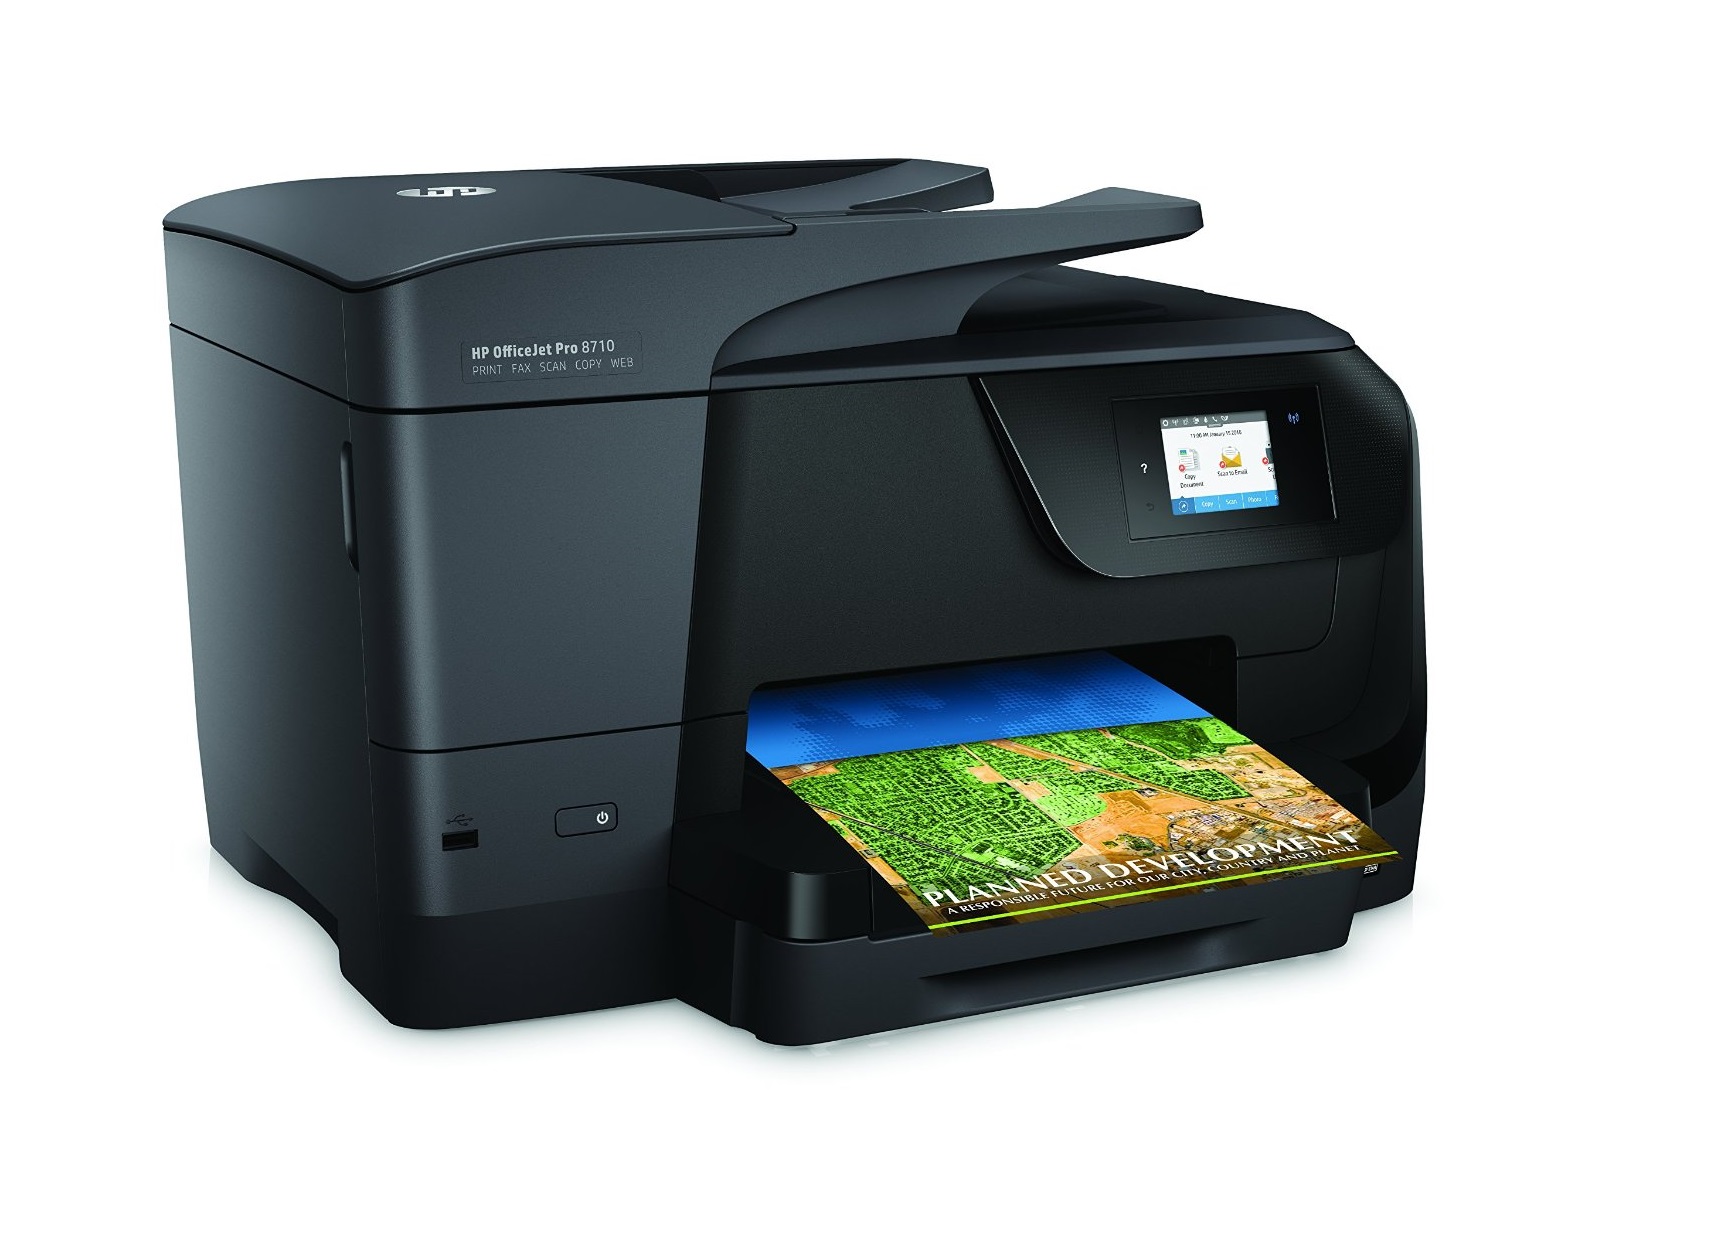 HP Officially Begins Blocking Non-HP Ink Cartridges Through Printer Firmware, Security Chips